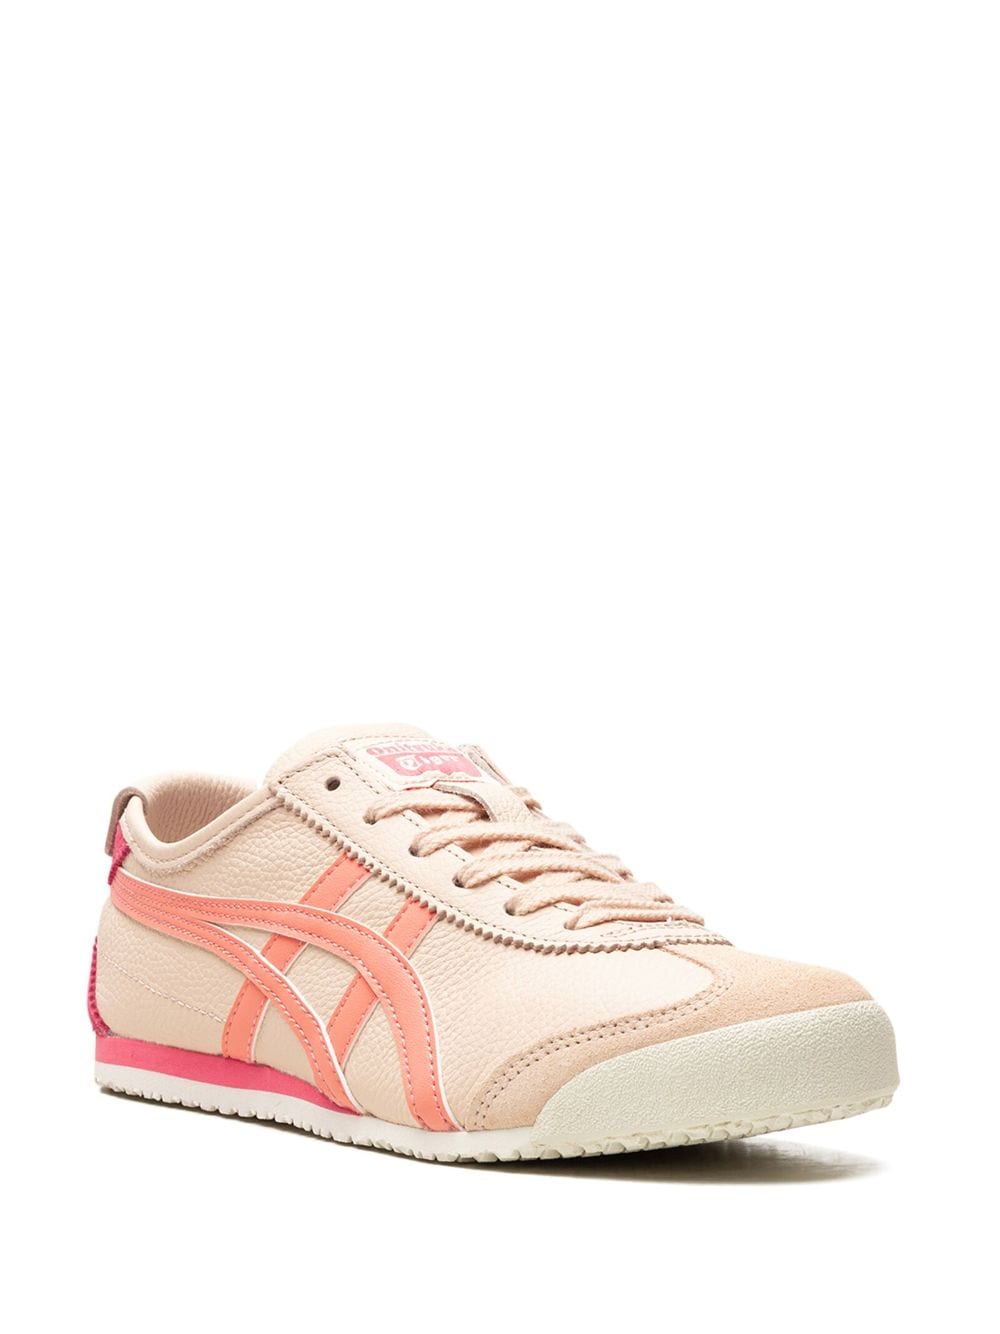 Onitsuka Tiger Mexico 66™ Beige/Pink sneakers